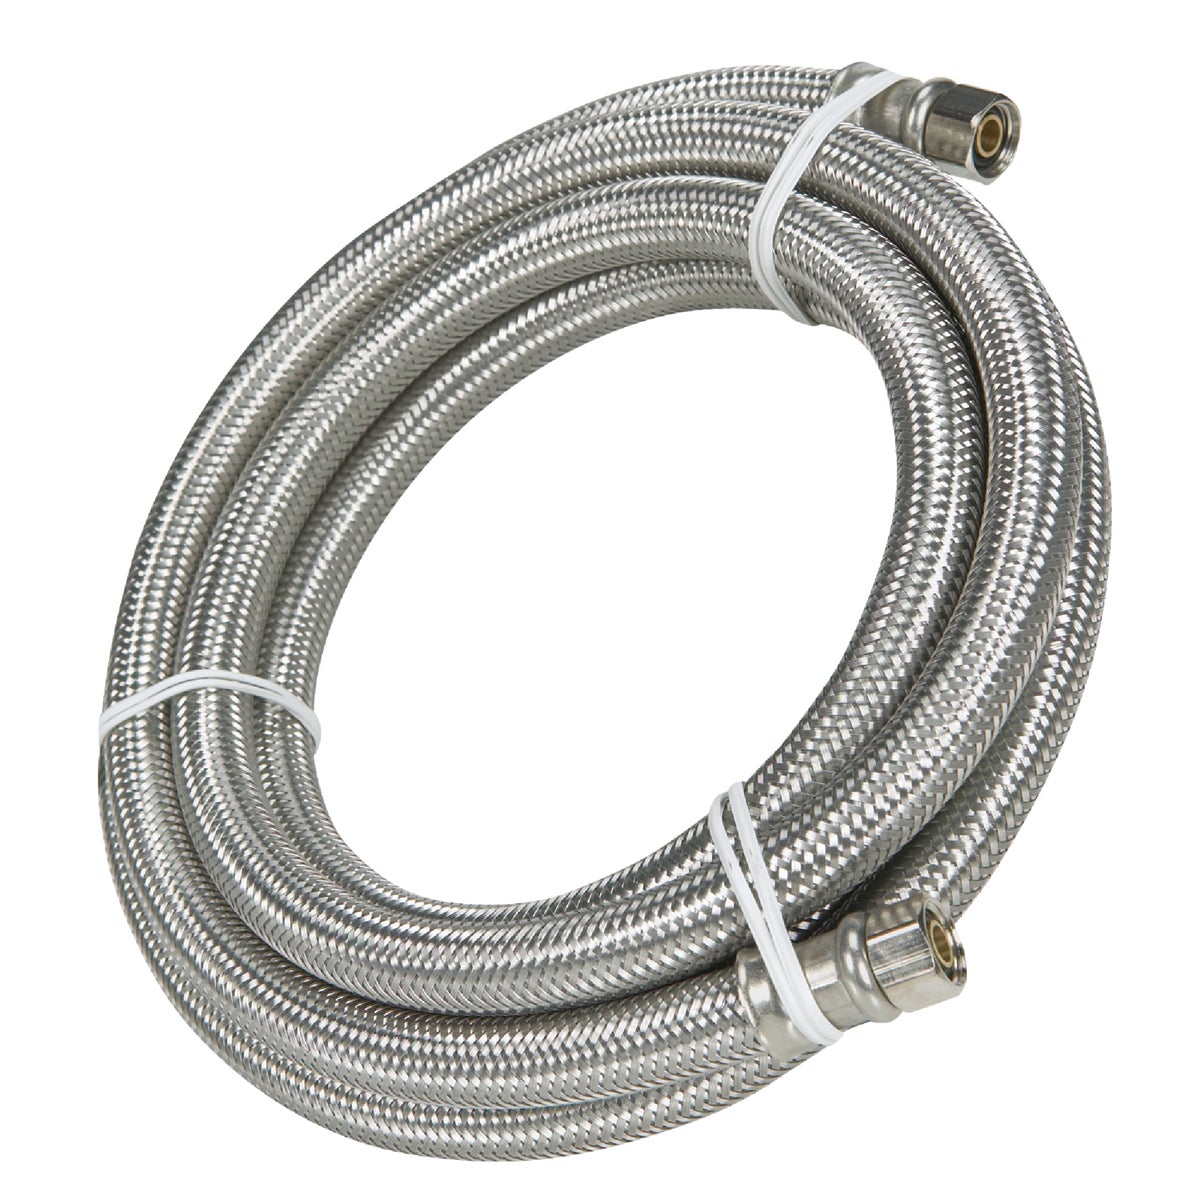 B&K 1/4 In. x 6 Ft. Ice Maker Connector Hose